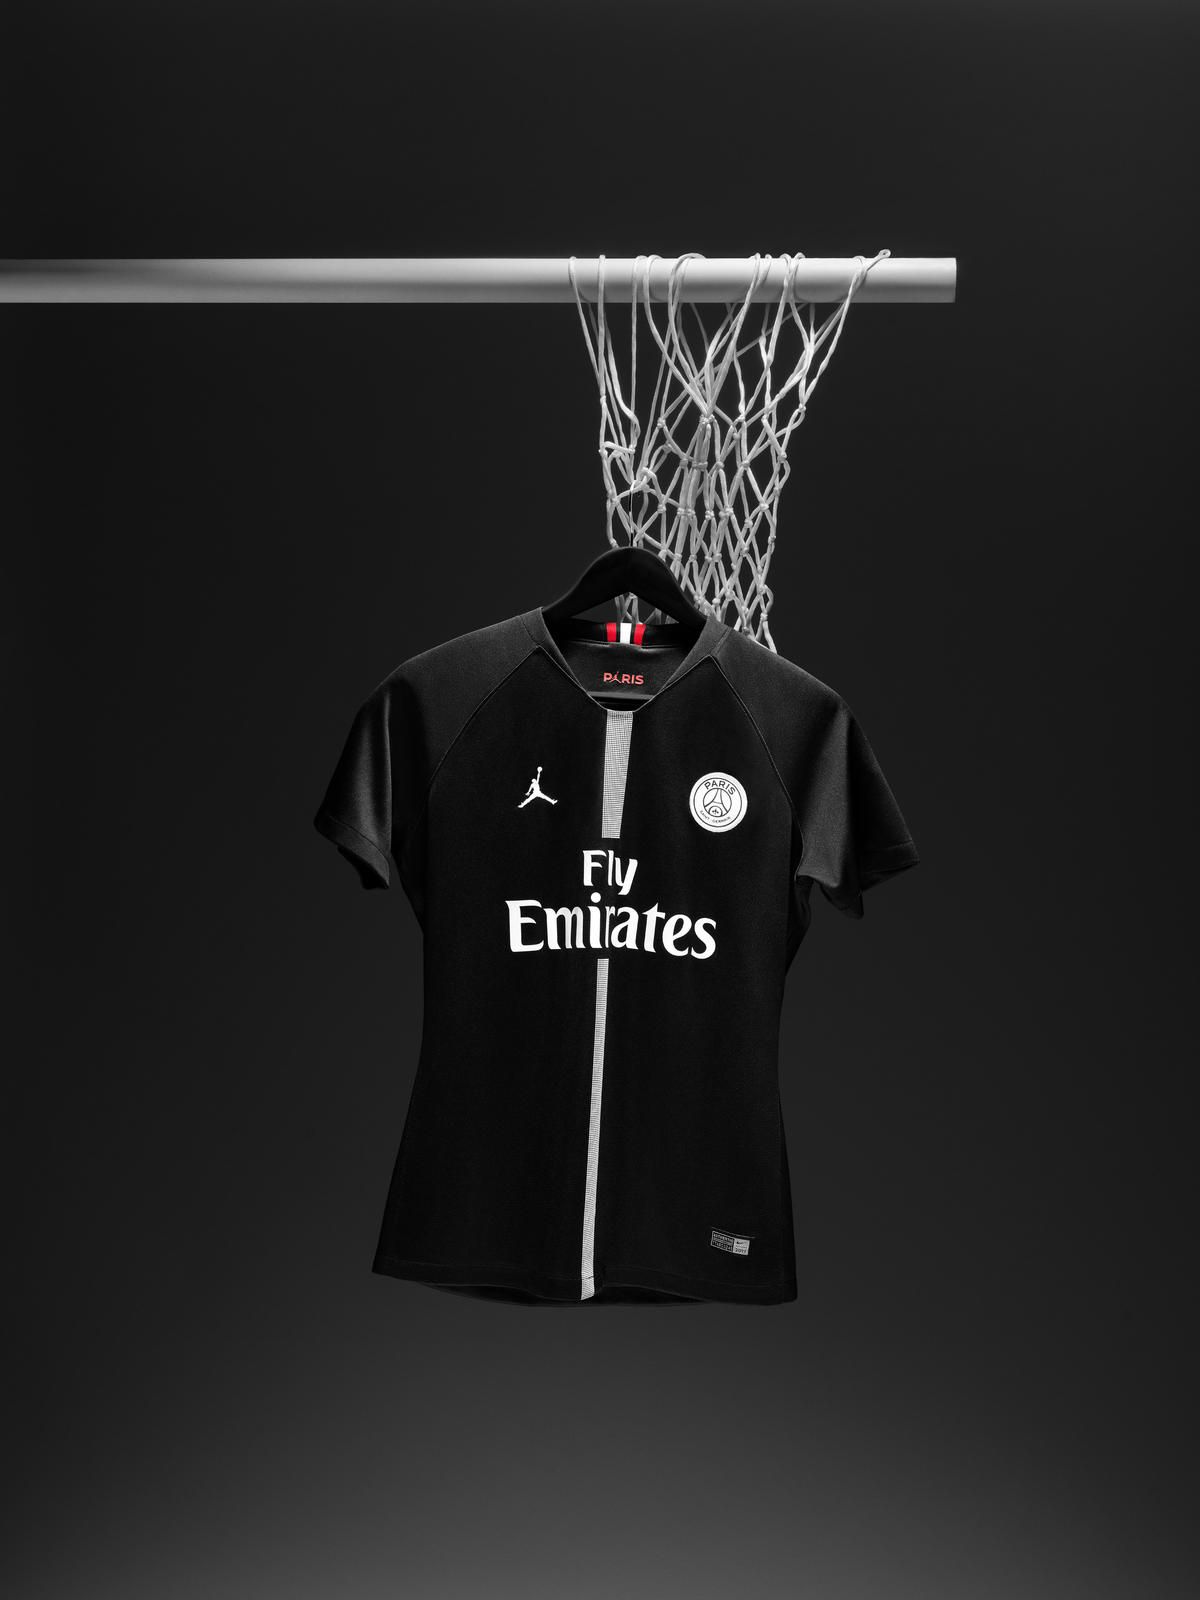 PSG unveil their new Michael Jordan themed jersey, and it is incredibly cool. JOE is the voice of Irish people at home and abroad